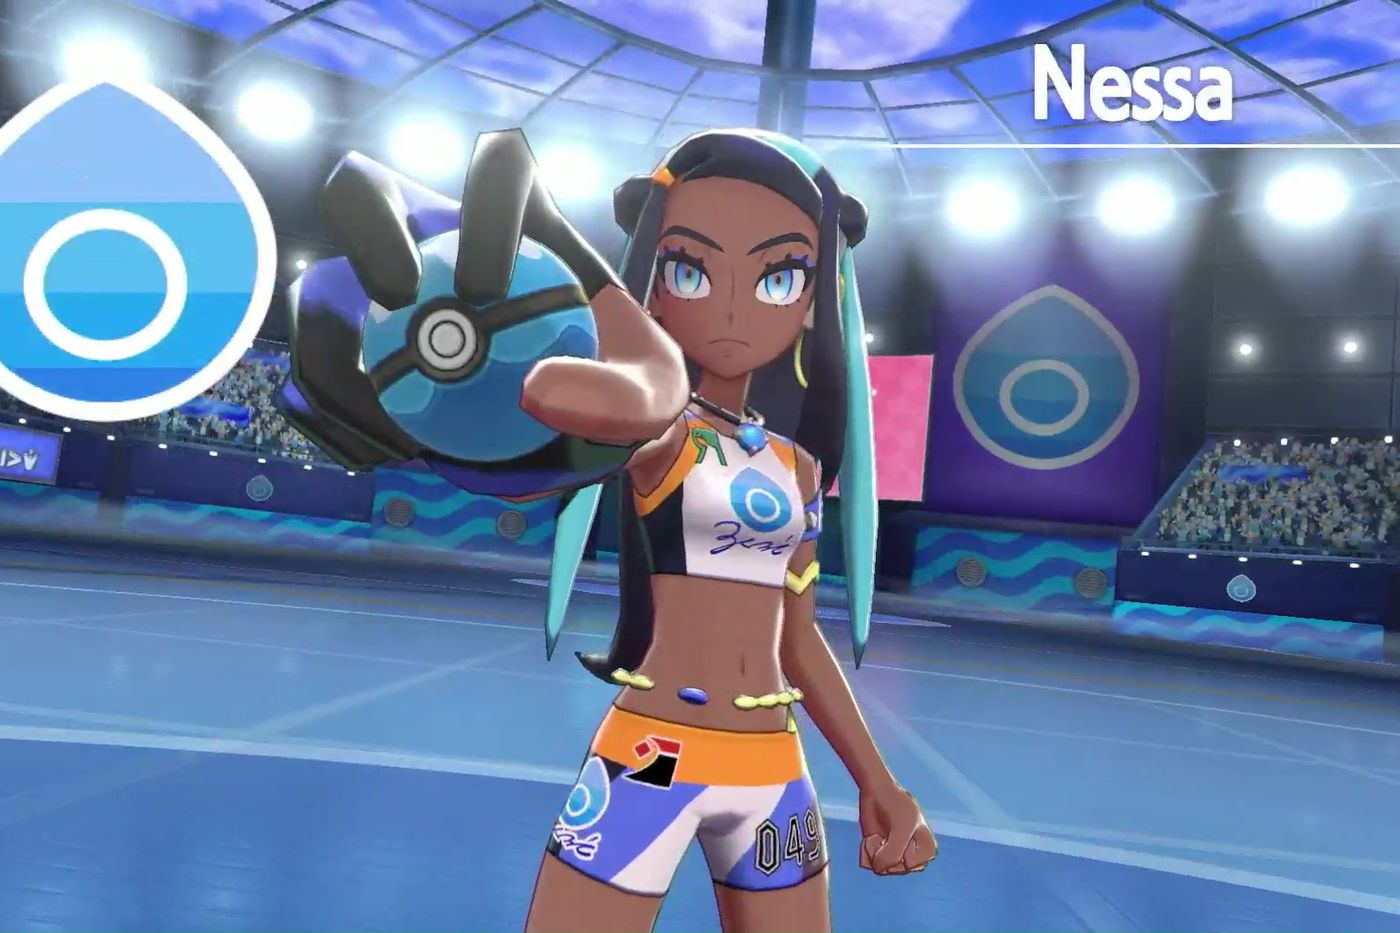 Water gym battle with Nessa guide - Pokemon Sword and Shield - Polygon